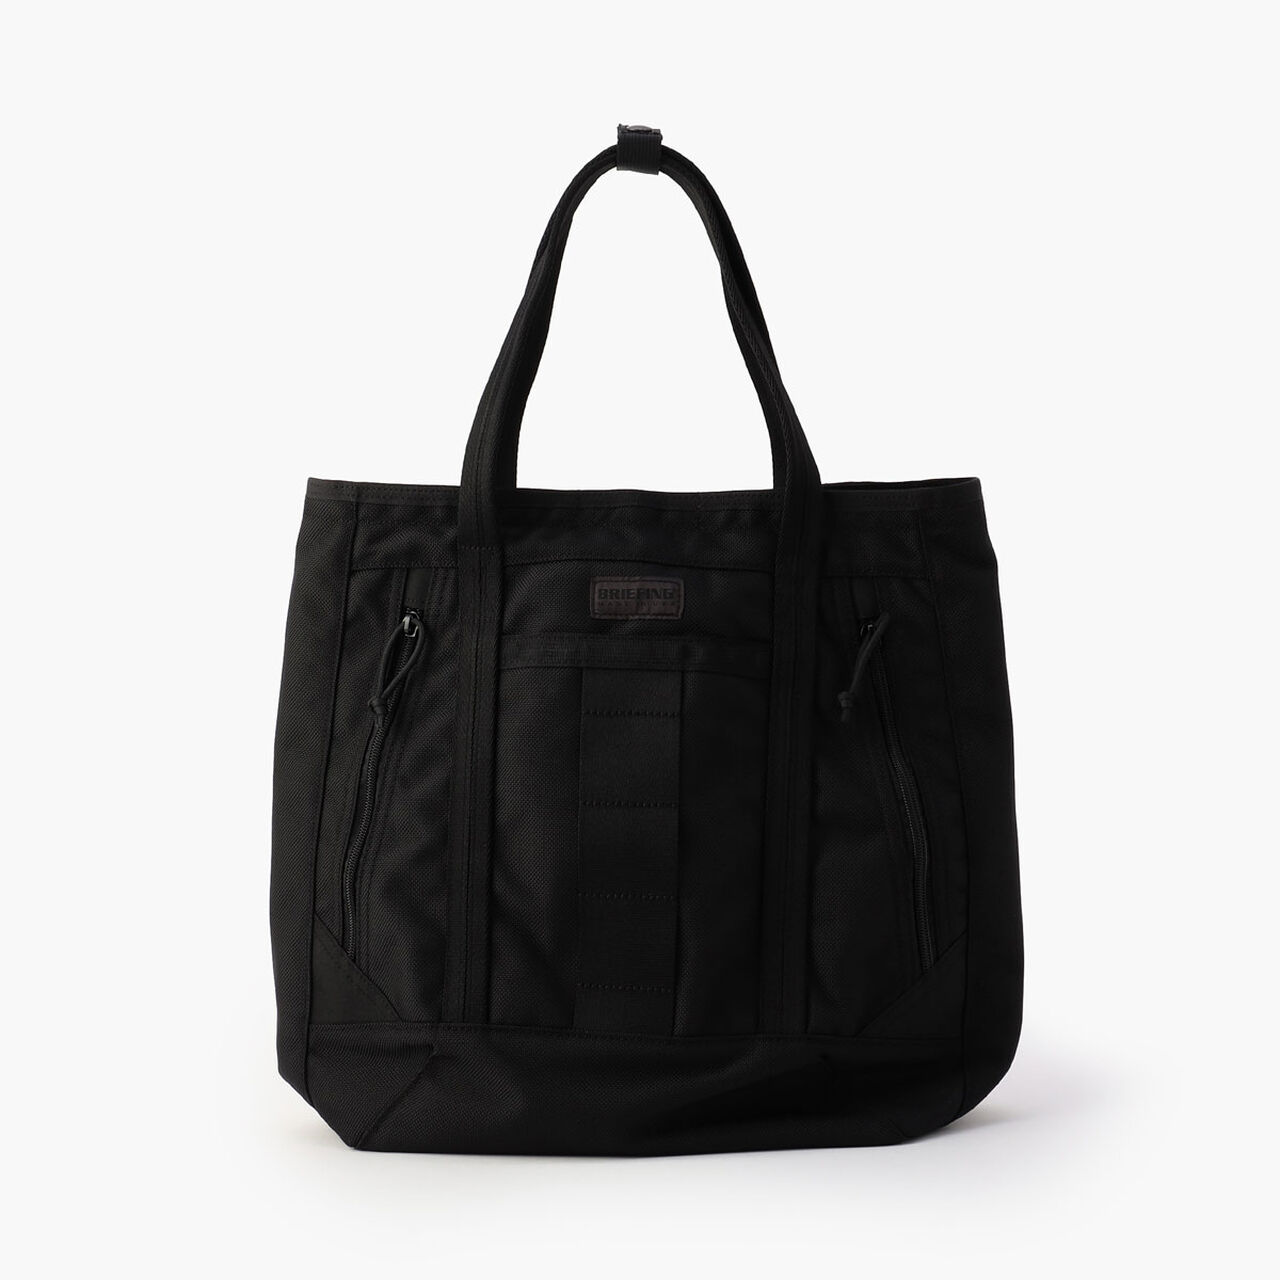 DELTA MASTER TOTE TALL SQD,黑色, large image number 0